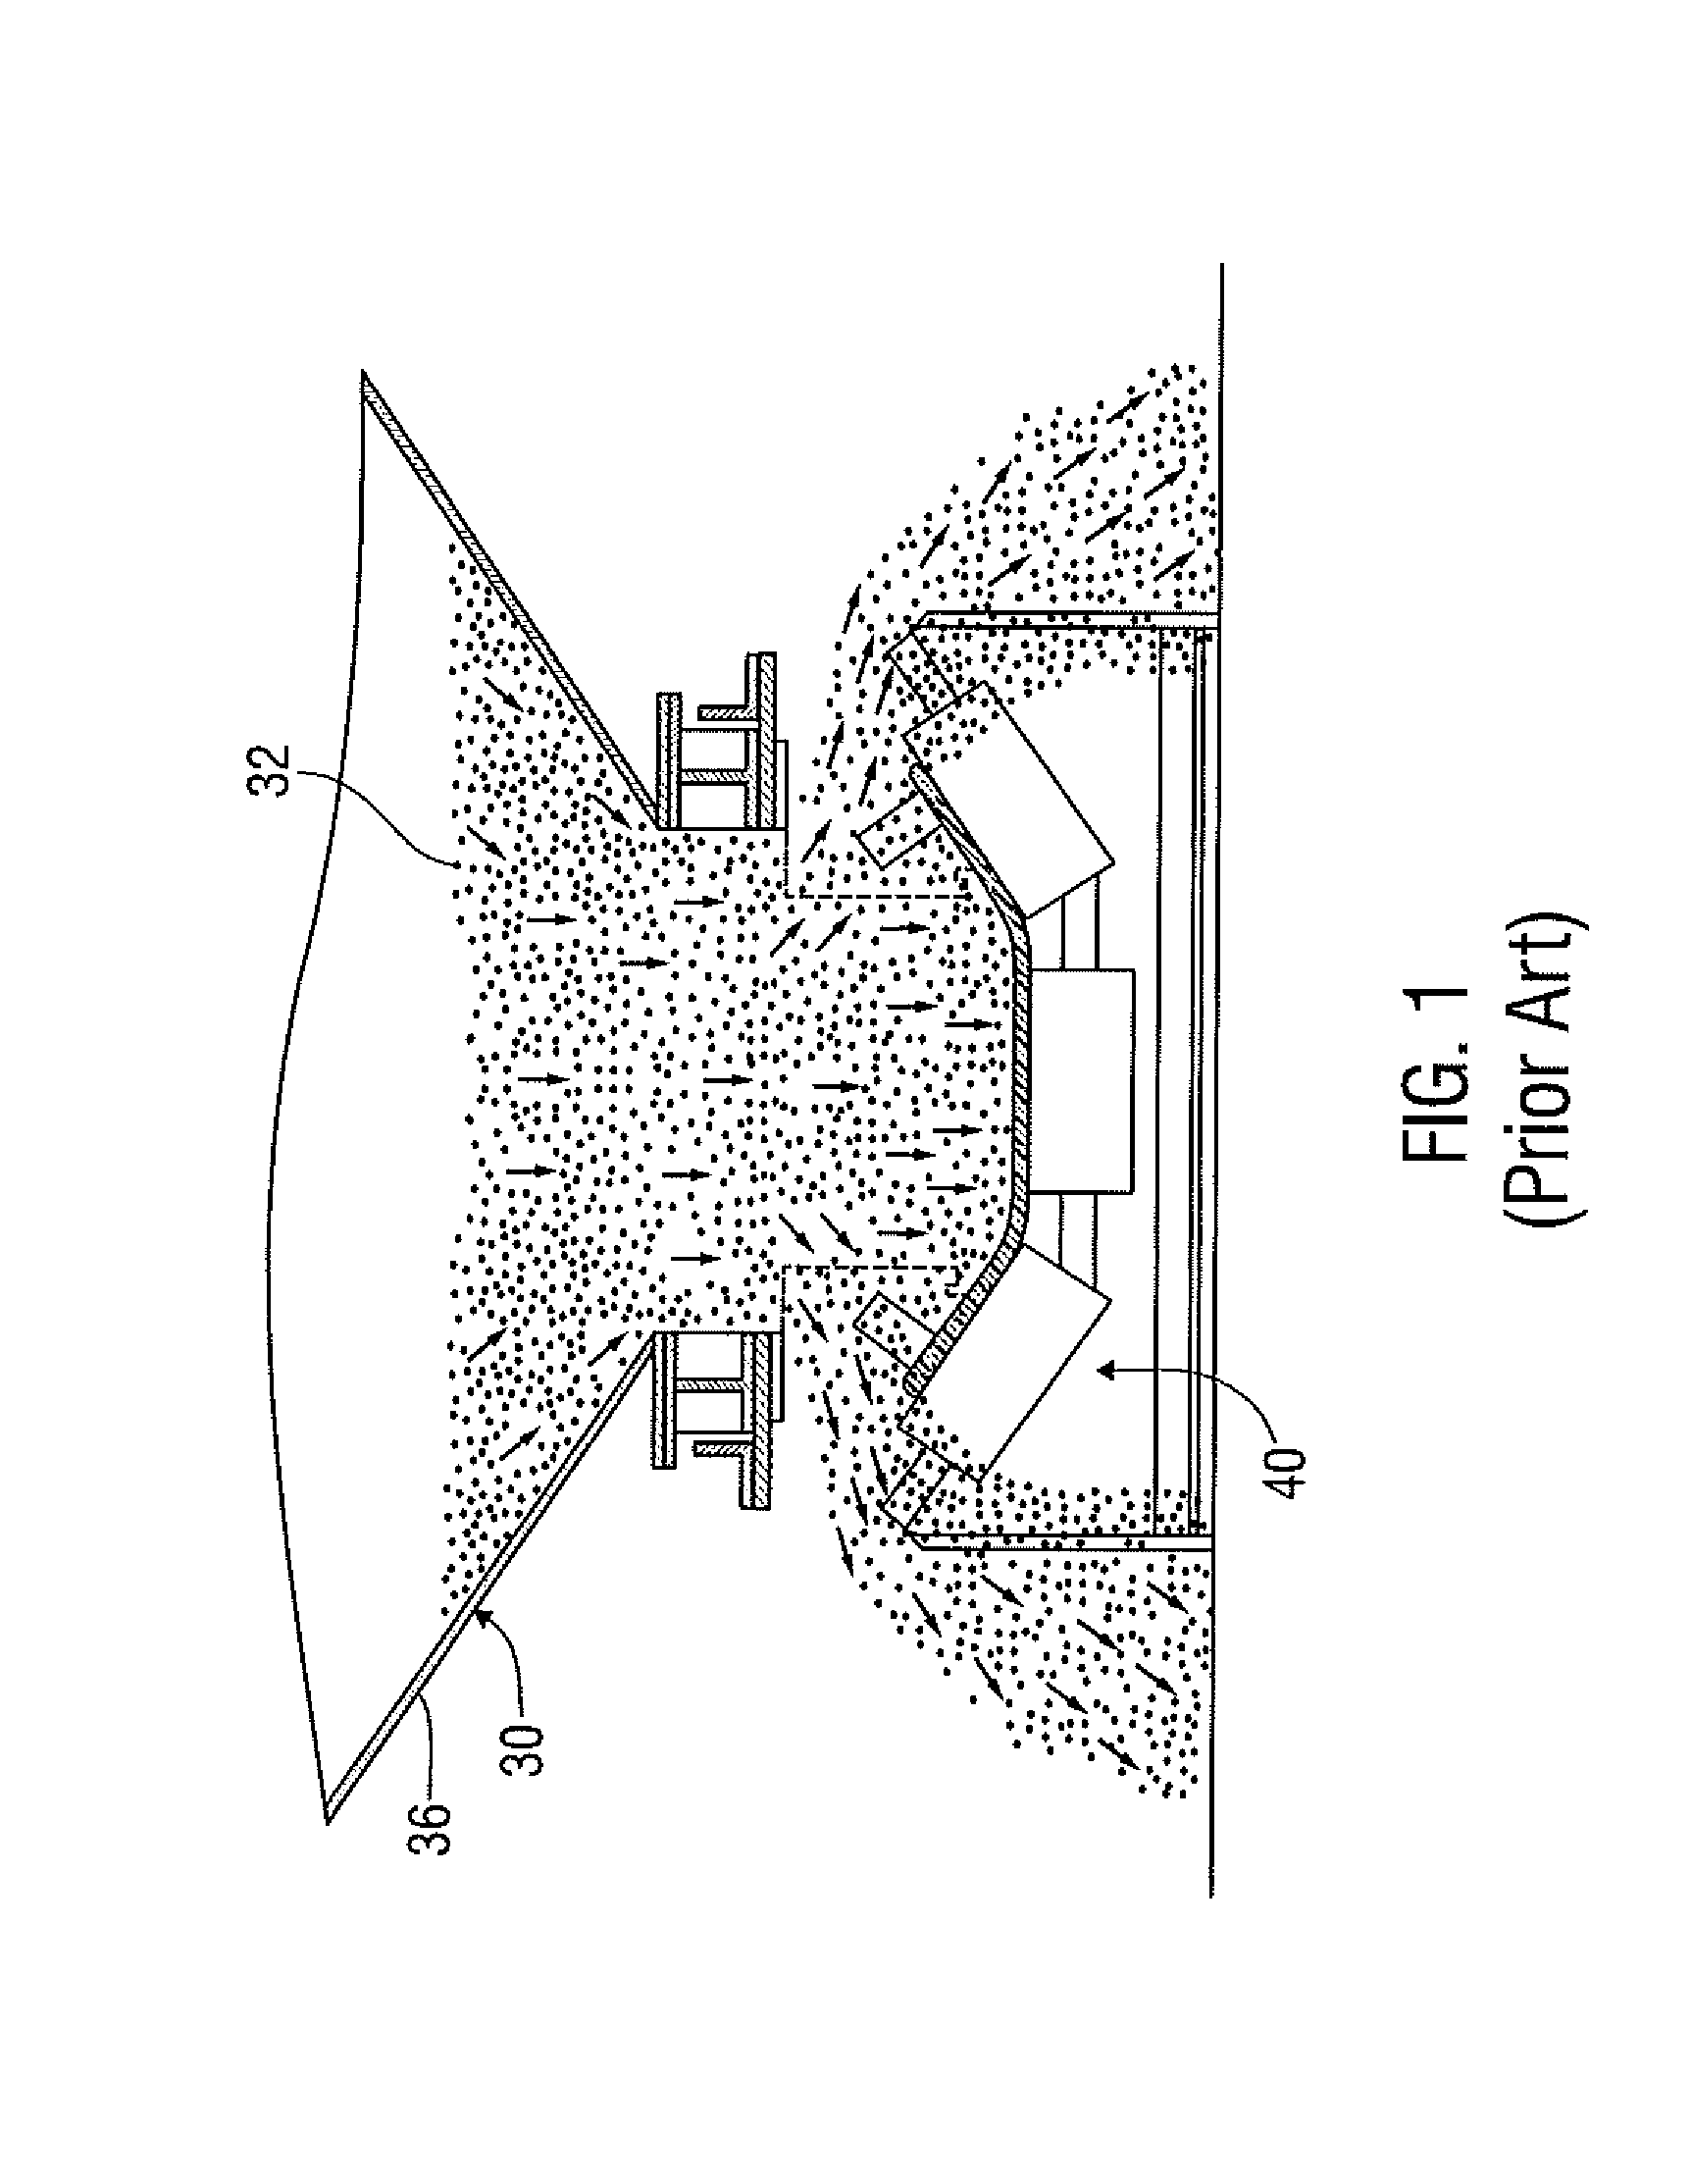 Apparatus and Methods for Assisting in Controlling Material Delivered on a Conveyor